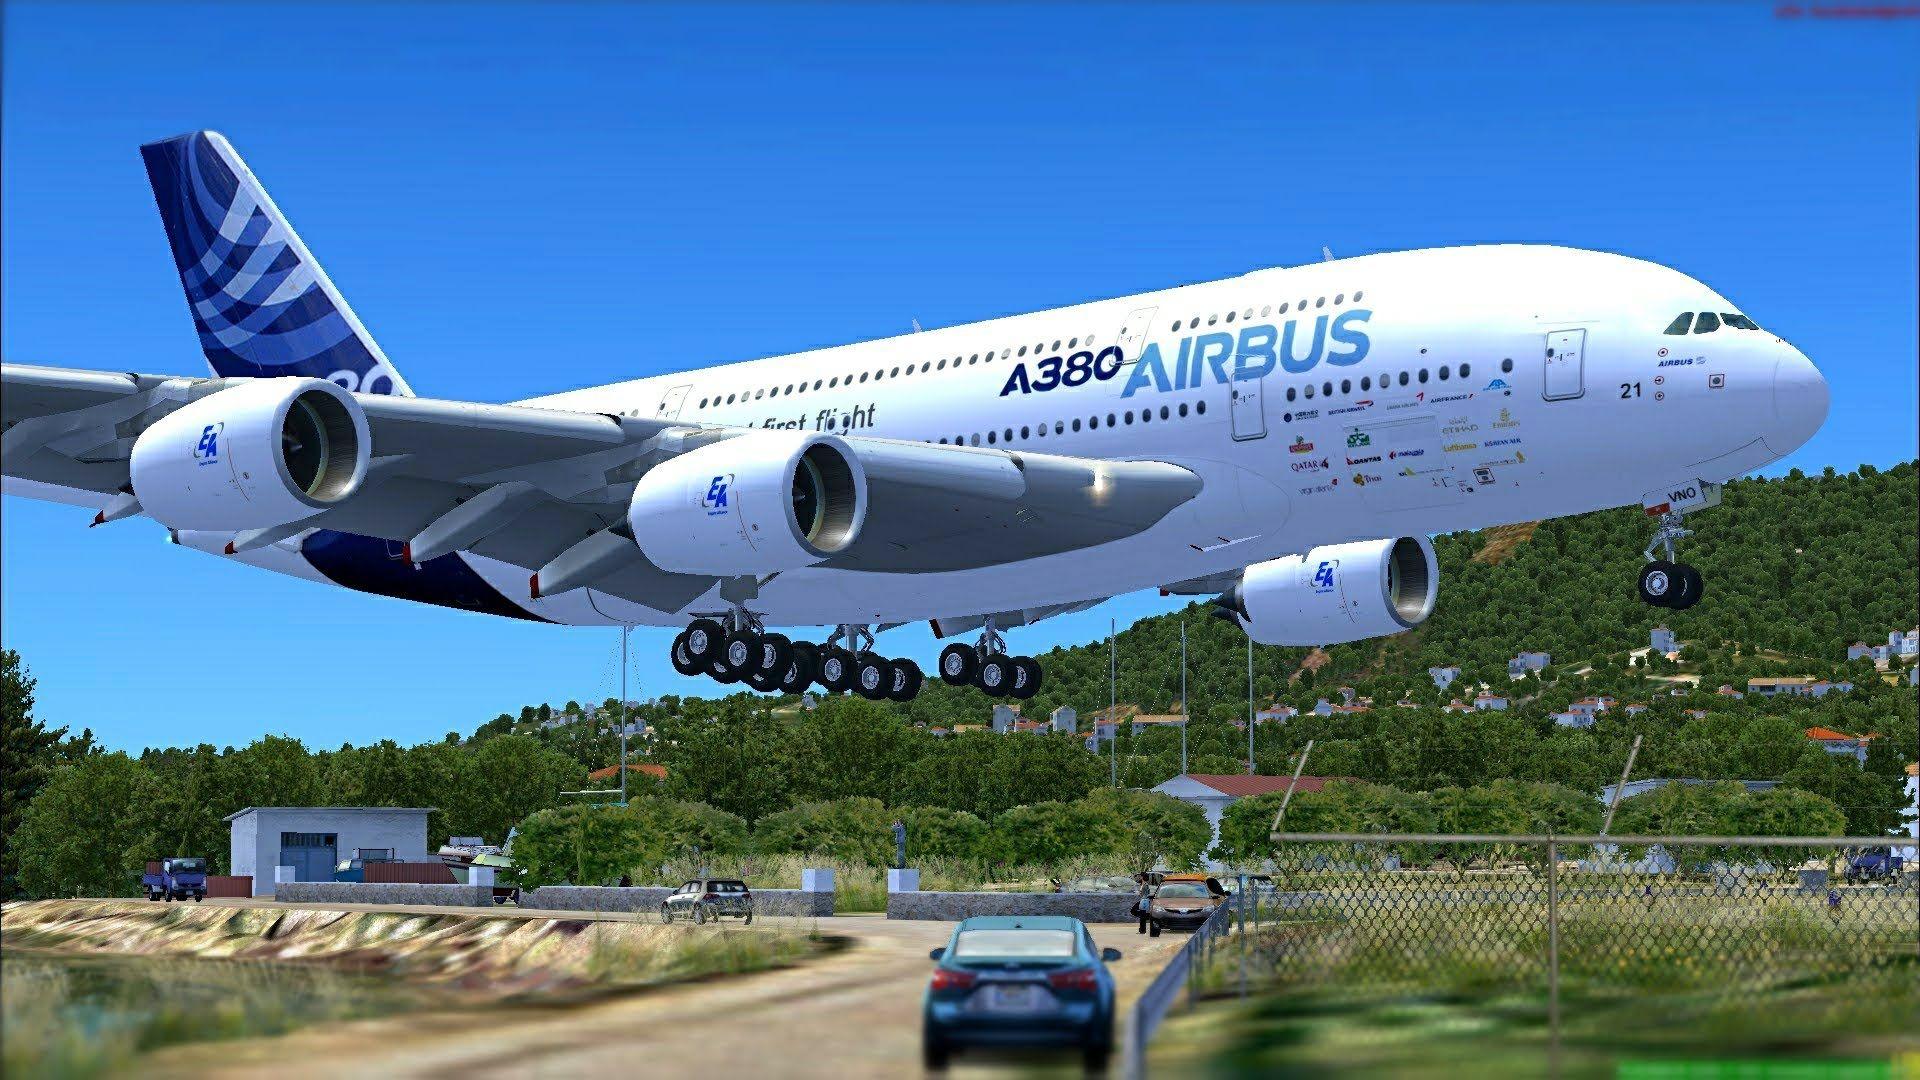 FSX】AIRBUS A380 LANDING AT SKIATHOS.. Possible or not possible